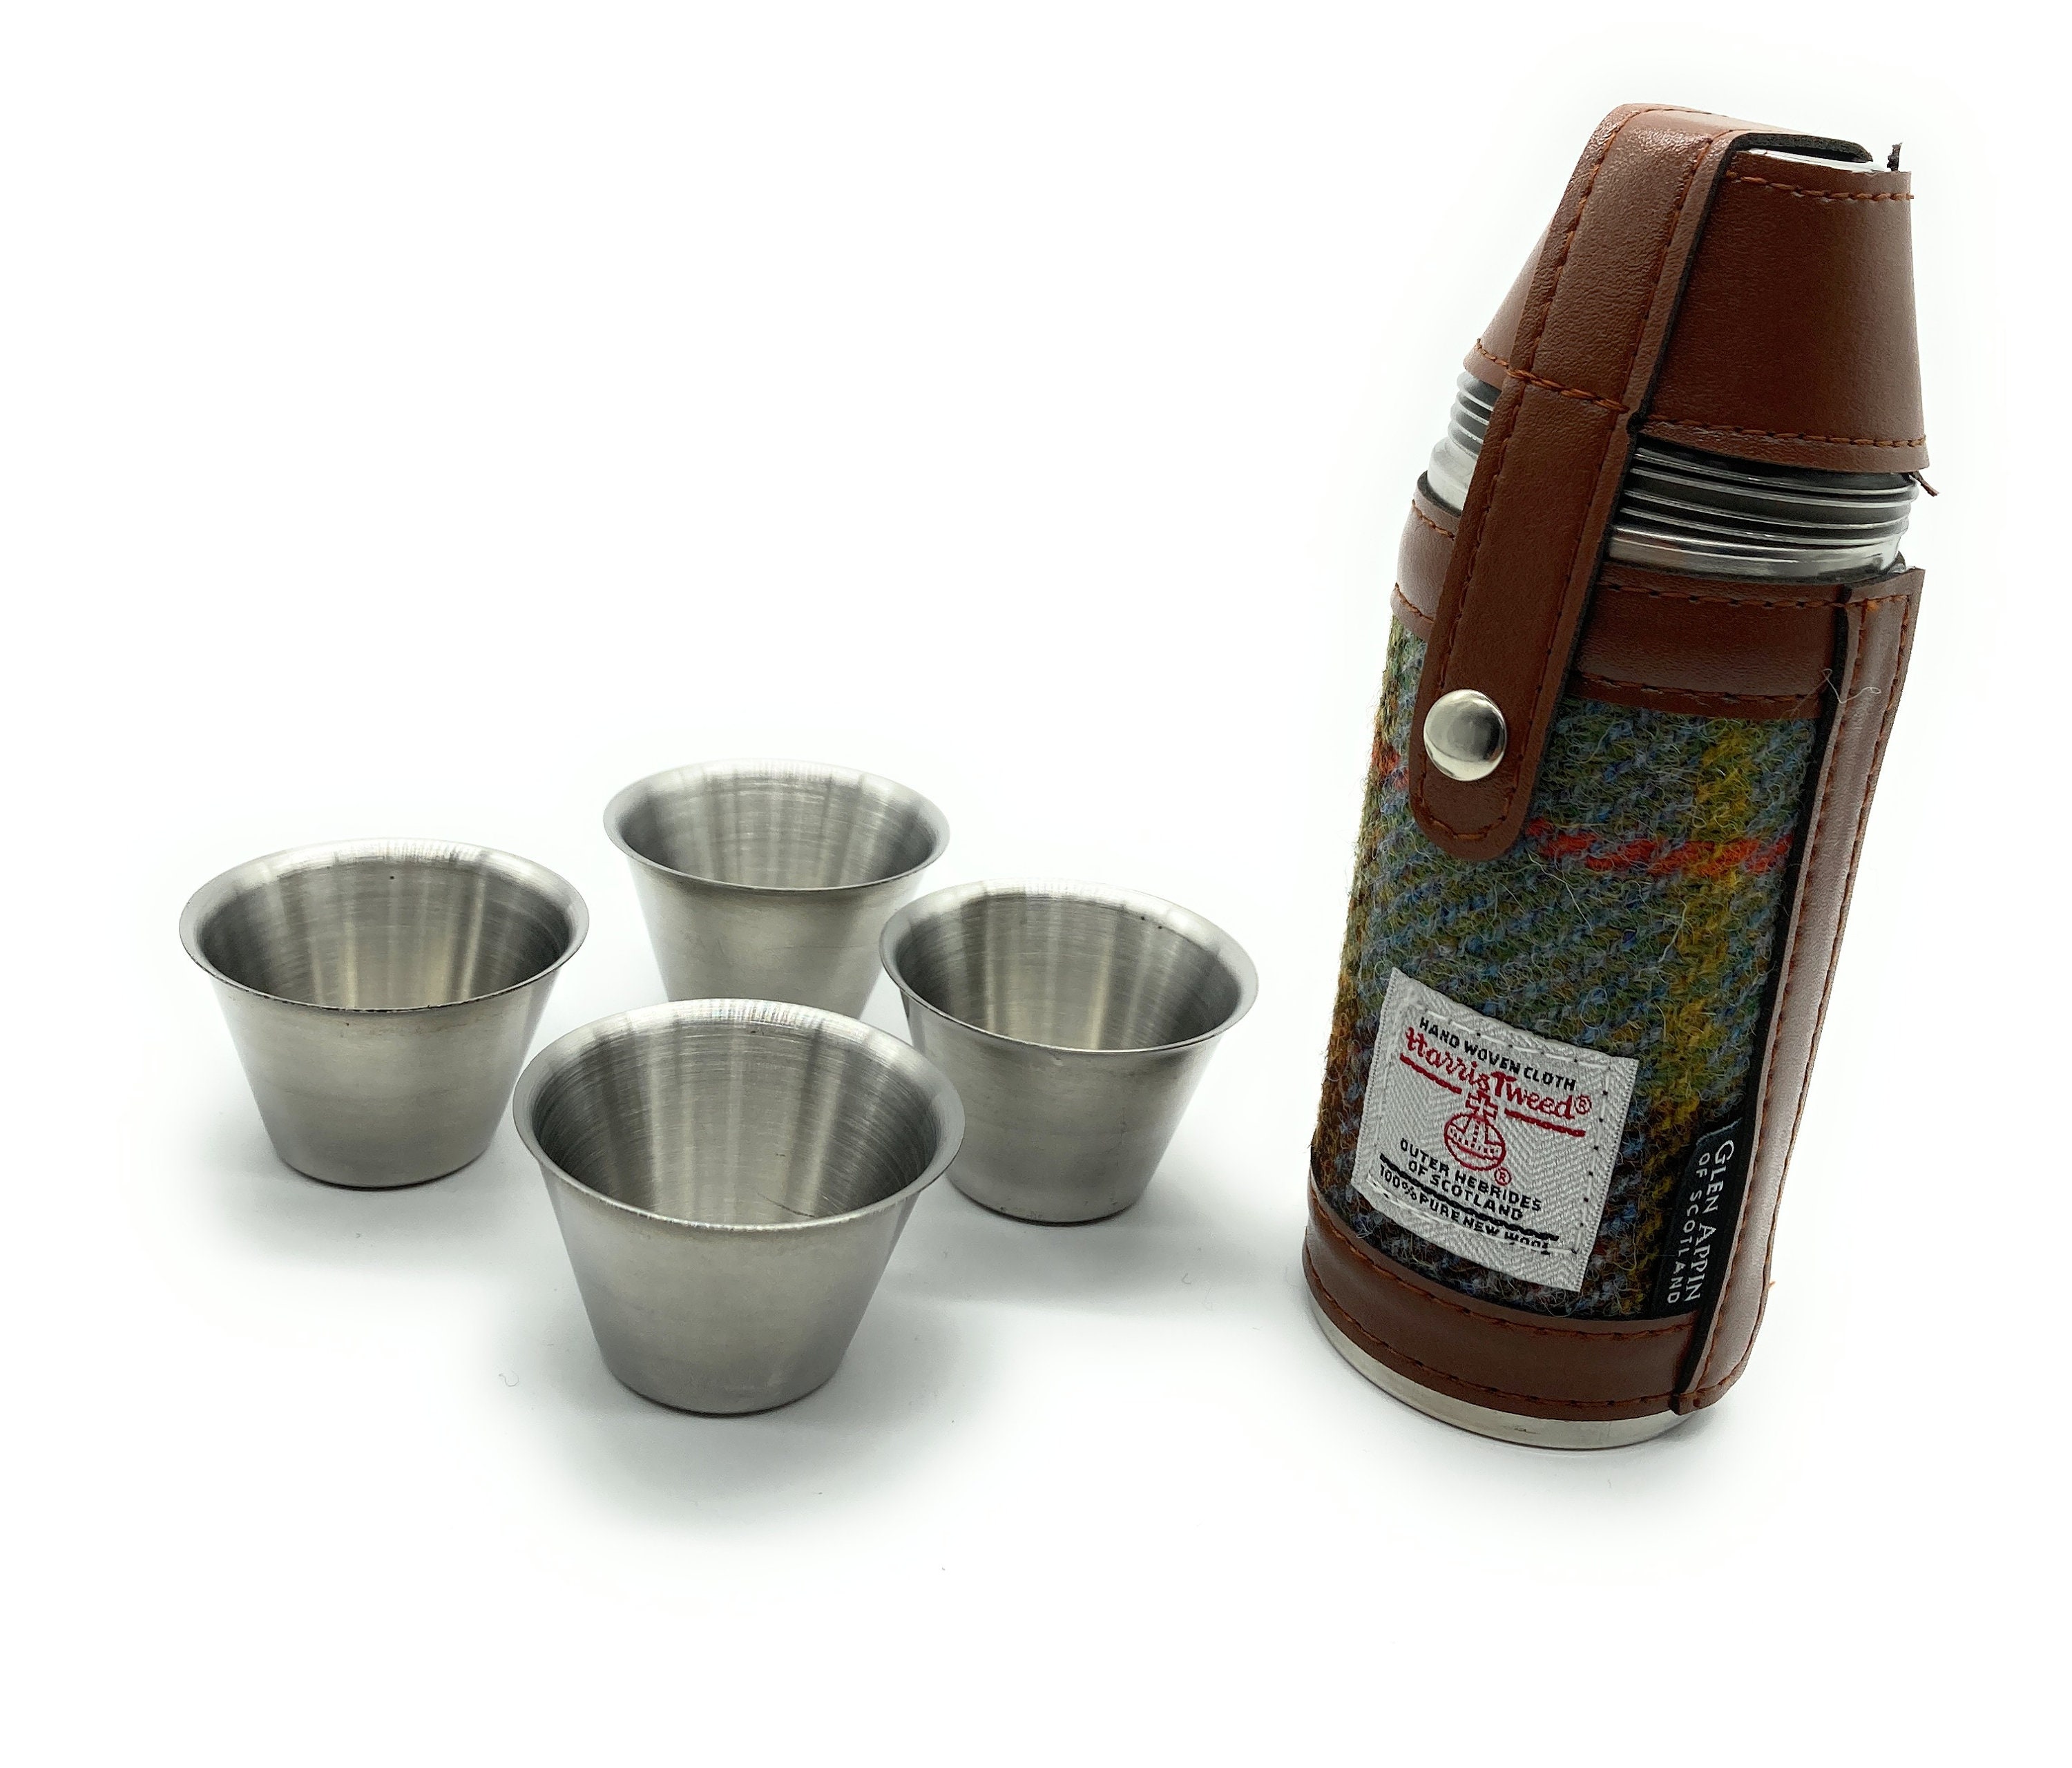 Wholesale 6.8oz Flask with Built-In Cup - Buy Wholesale Flasks